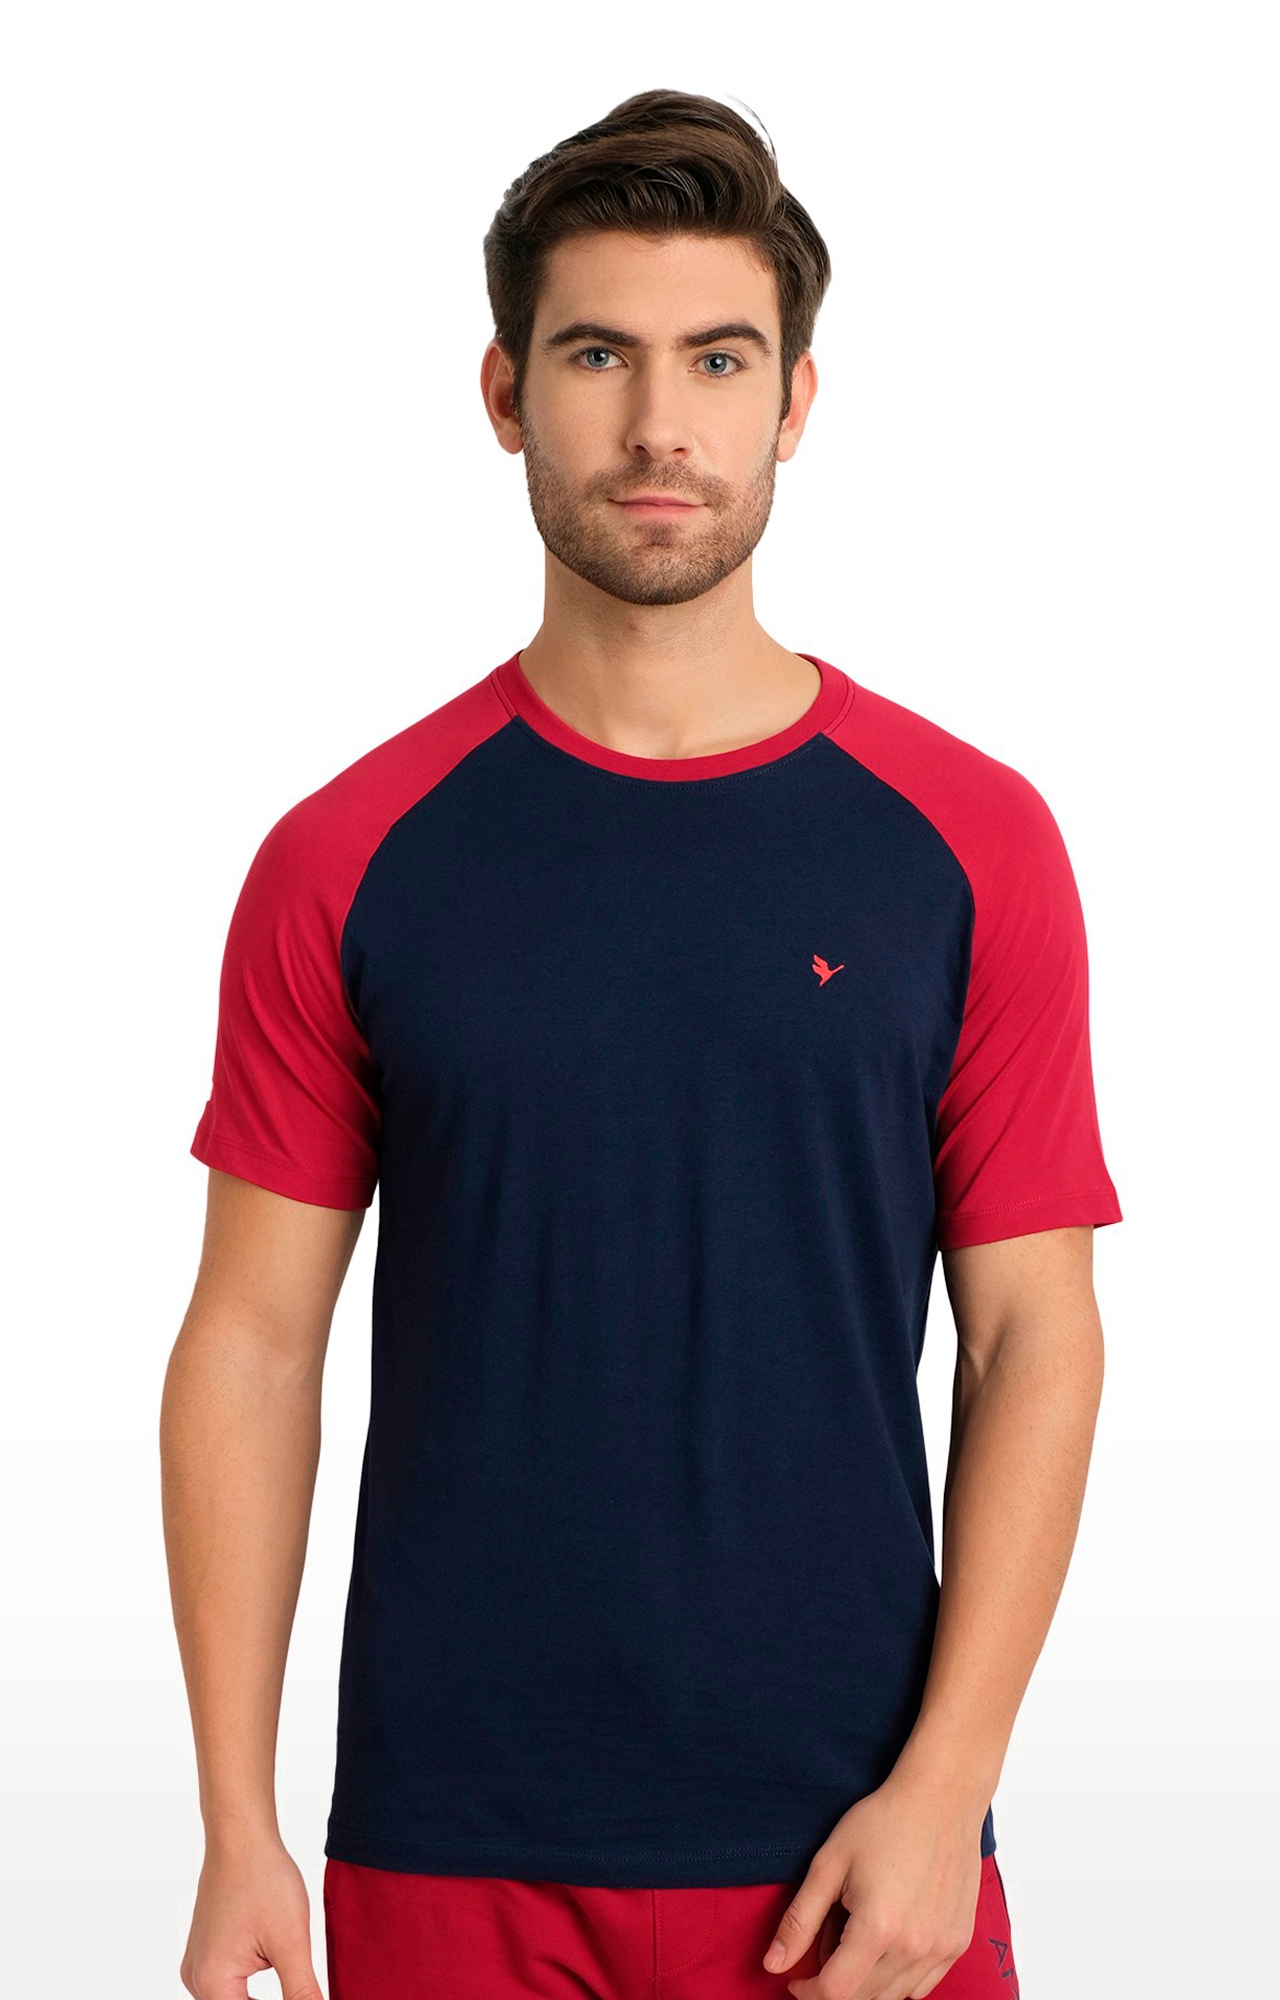 Men's Blue and Red Cotton Solid Regular T-Shirt